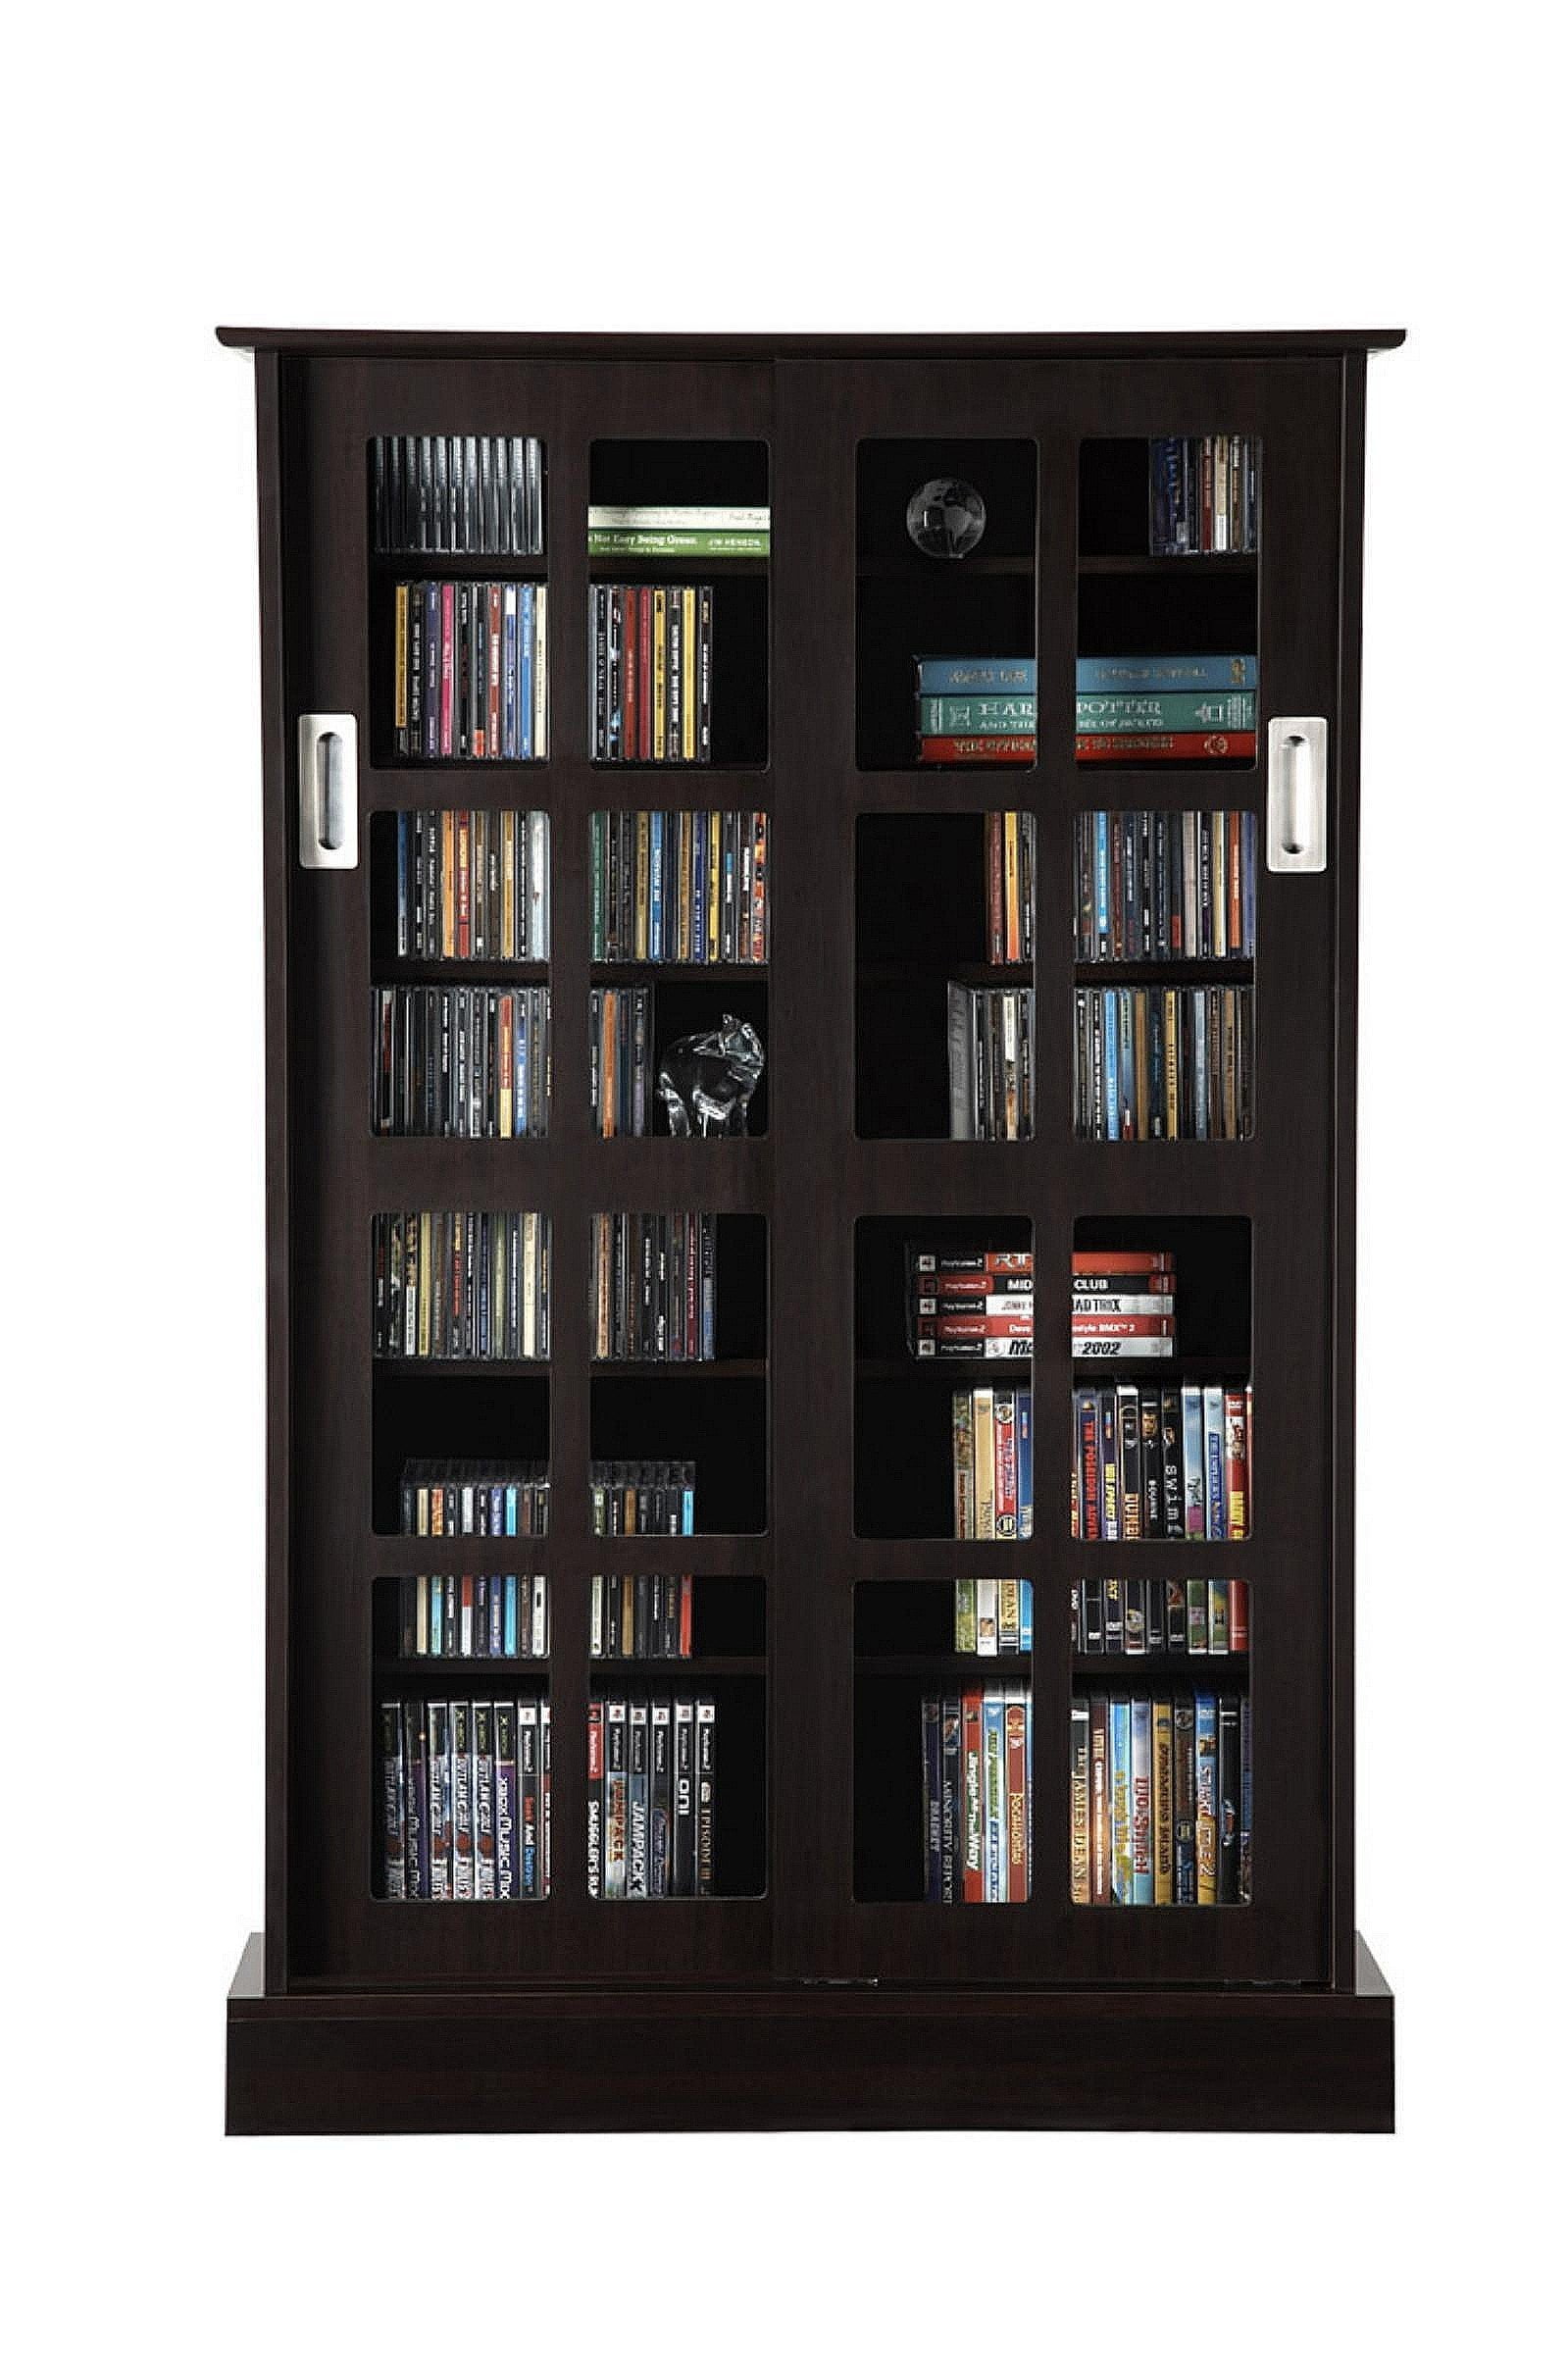 Atlantic Windowpane Adjustable Media Cabinet - Tempered Glass Pane Styled Sliding Doors, Store 216 Blu-Rays,192 DVDs or 576, Adjustable Shelves, 32 X 9.5 X 49.25 inches PN94835721 in Espre